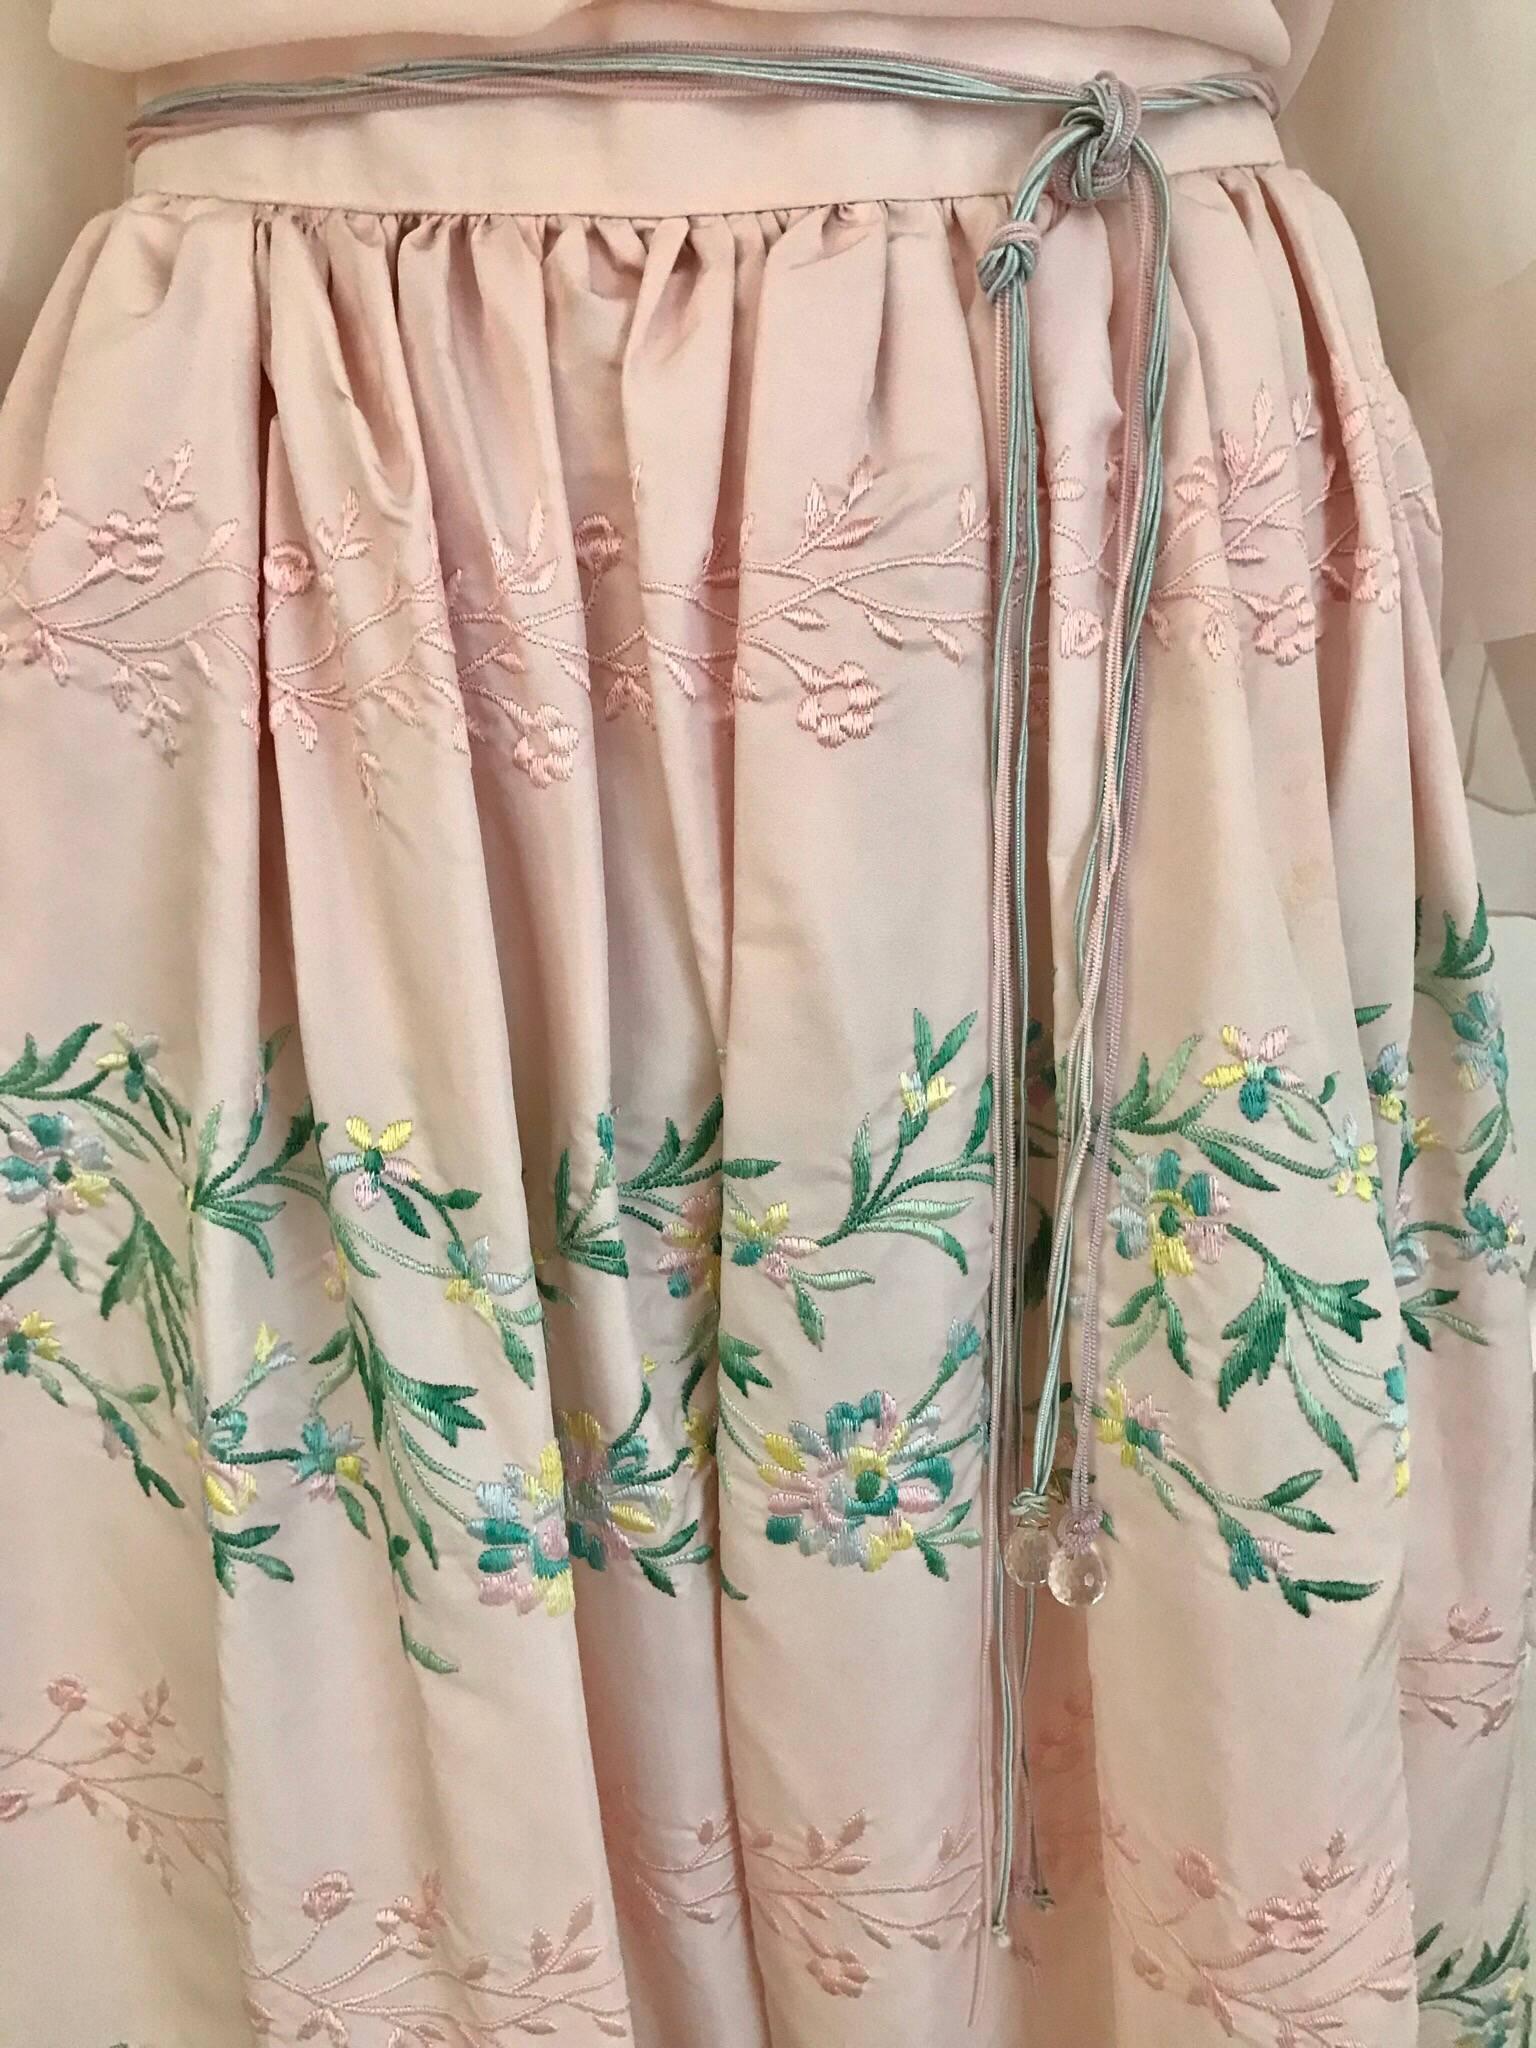 This 1980s Oscar de LaRenta peasant blouse with matching embroidered skirt is the perfect blend of casual, sexy and elegant. The blouse can be worn on shoulder, off shoulder or one shoulder. The heavy silk skirt has beautiful detailed embroidery of